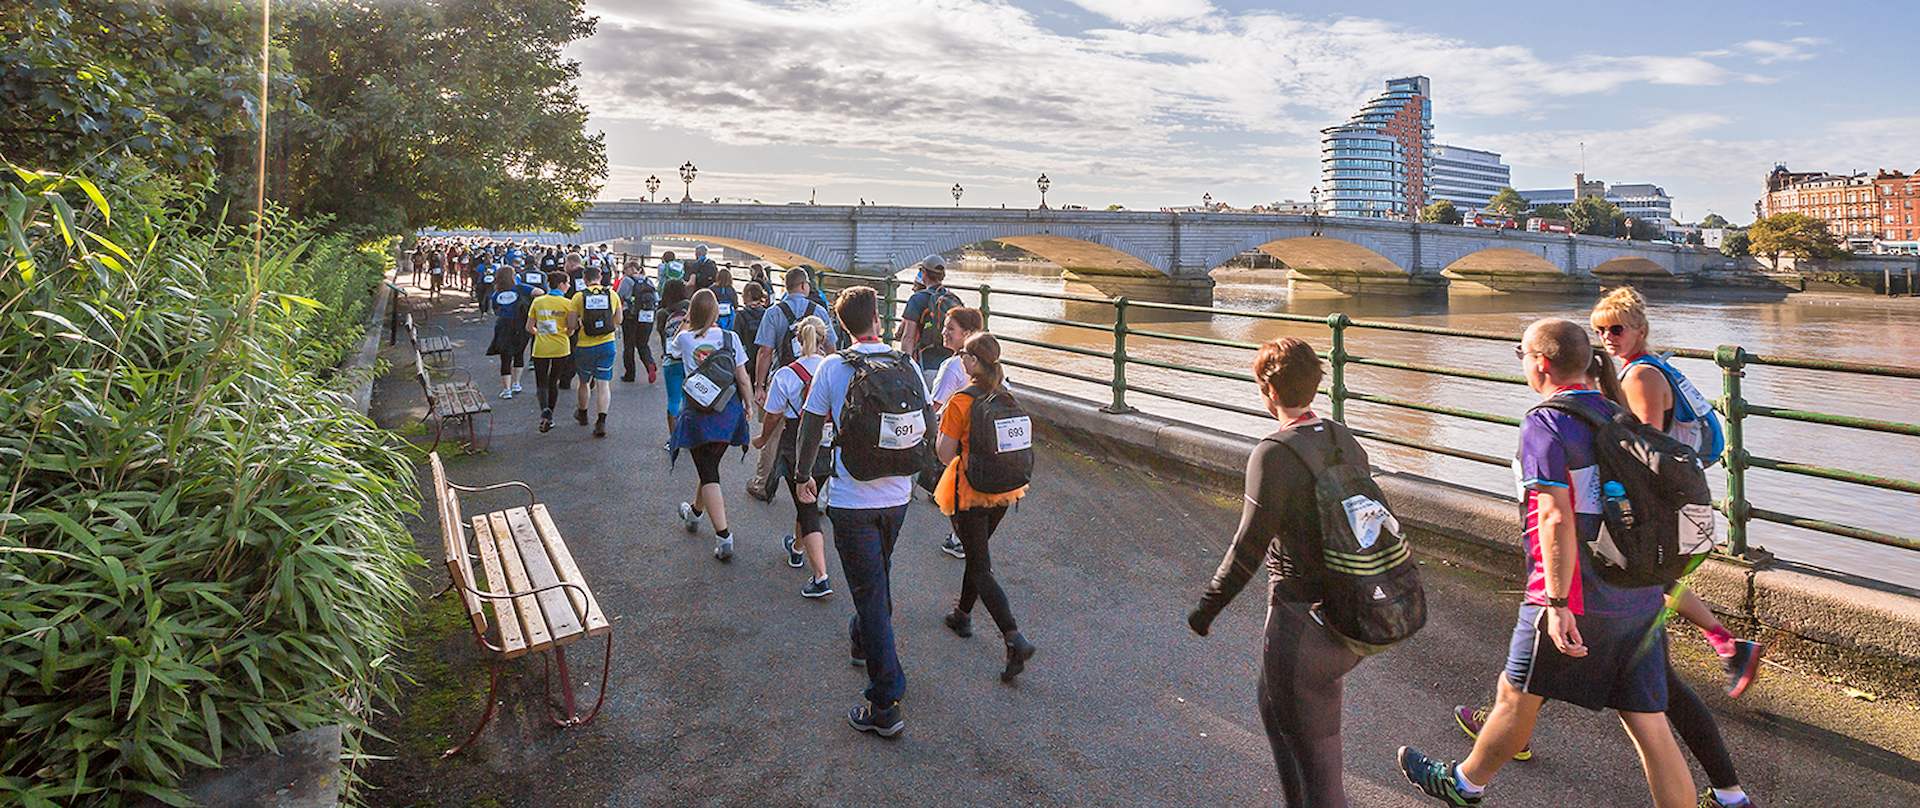 A large group of walkers walk beside the River Thames towards a bridge in the distance as part of the Thames Bridge Trek.